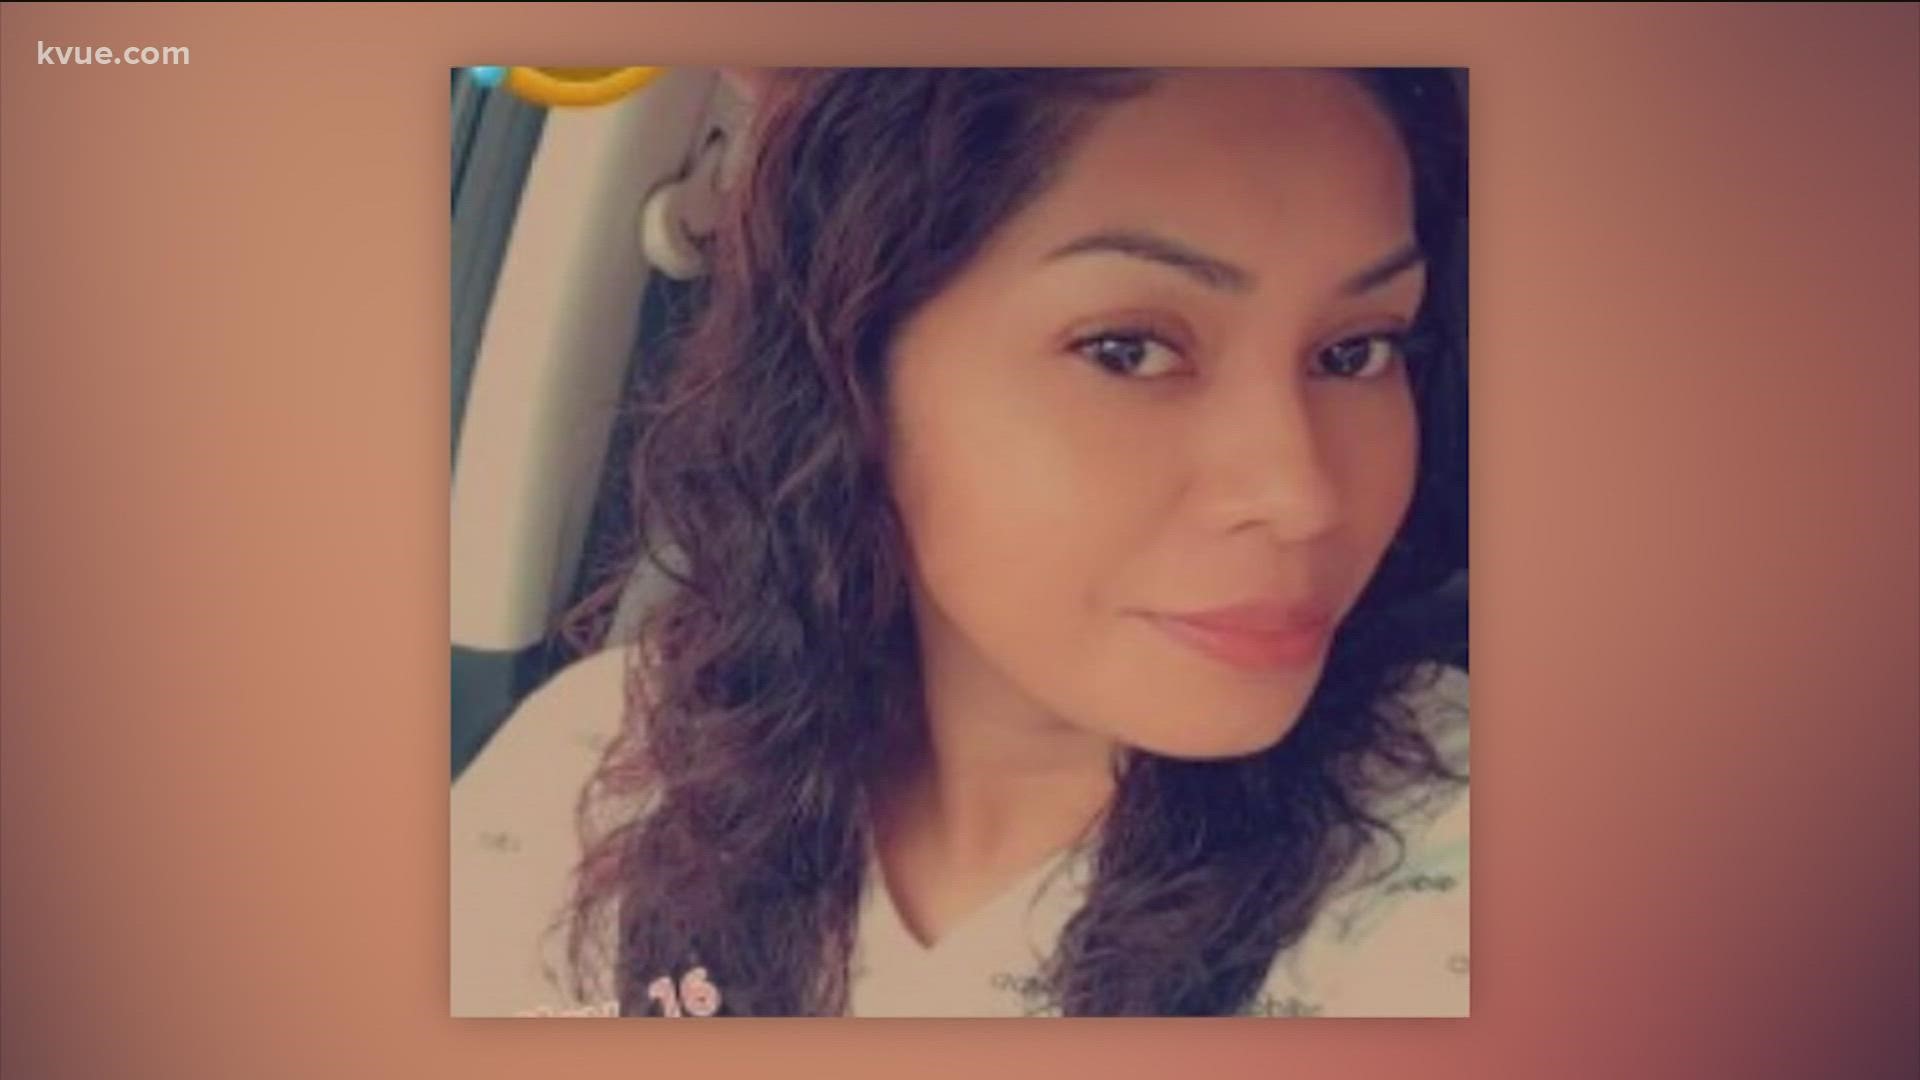 The TCSO said Camerina Trujillo Perez was found dead in her car in a Pflugerville parking lot. Her boyfriend is wanted for murder.